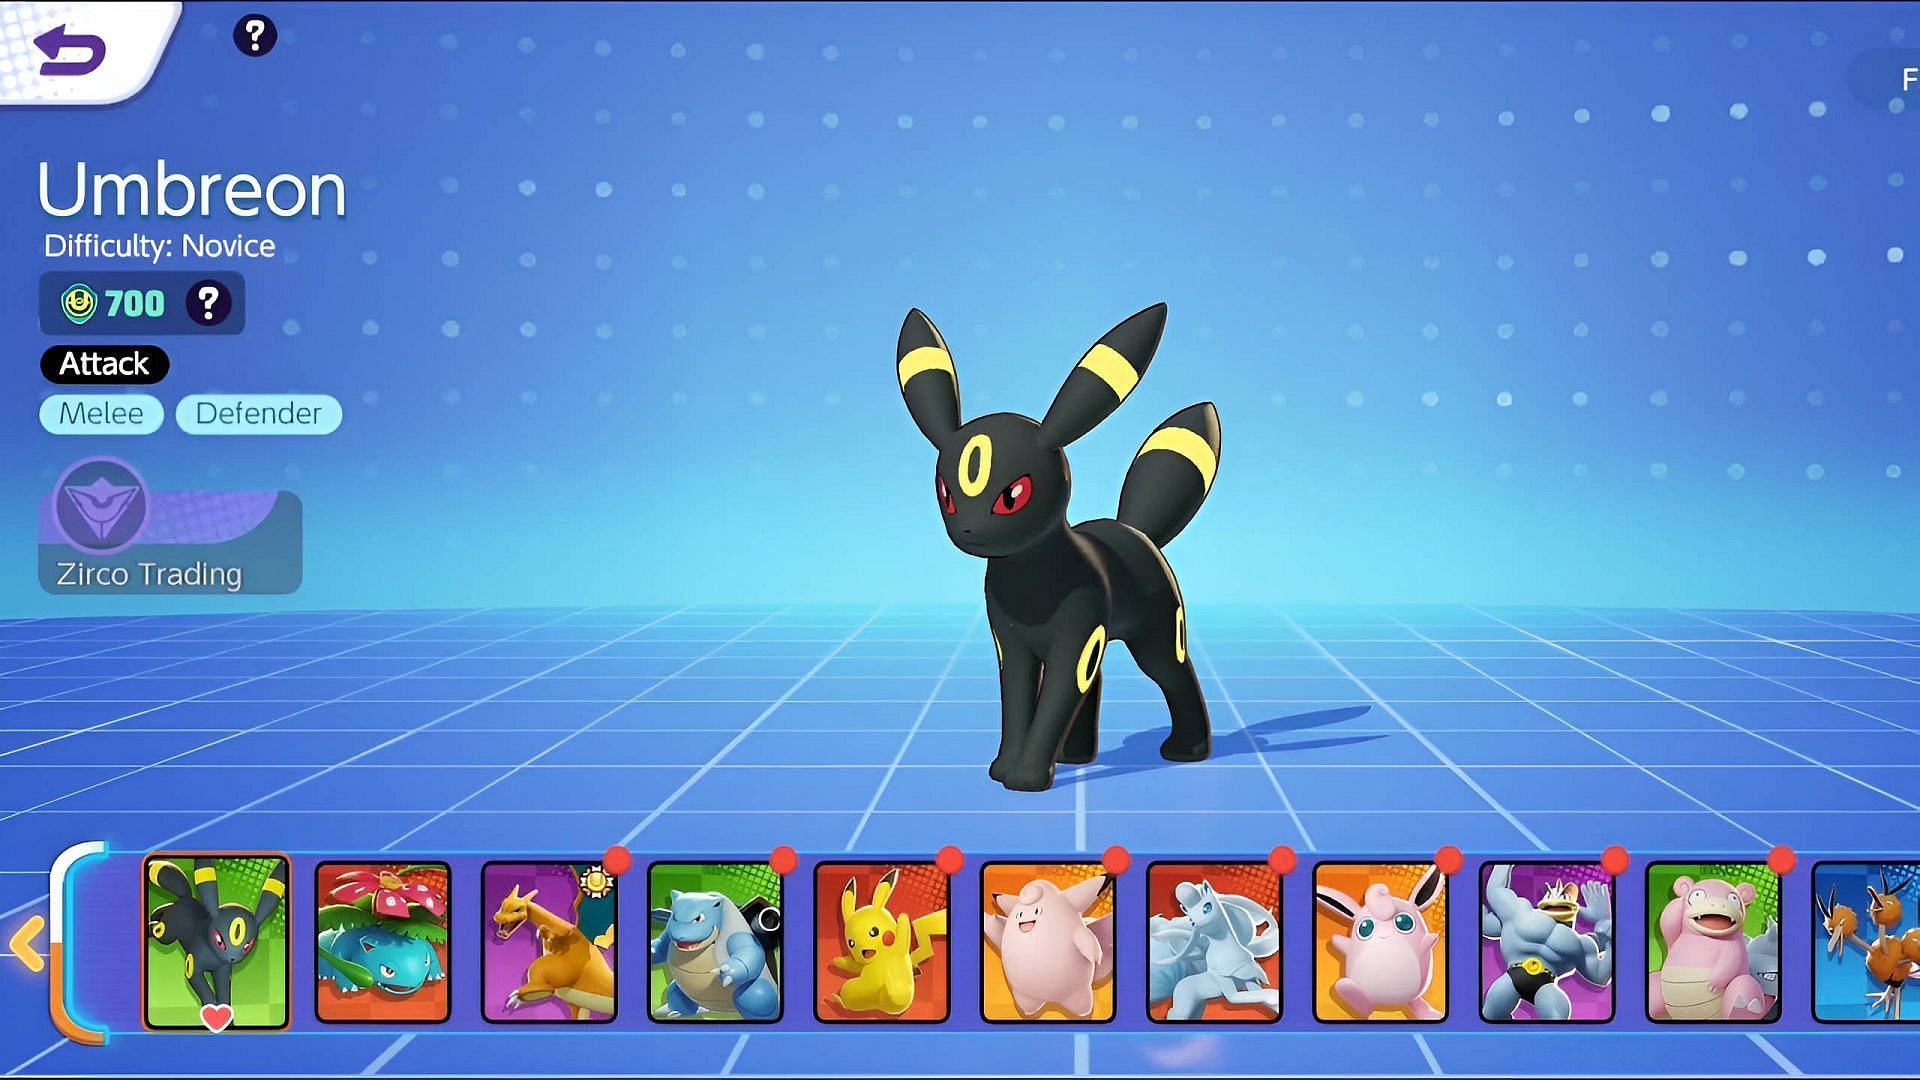 The best moveset for Umbreon in Pokemon Gold and Silver